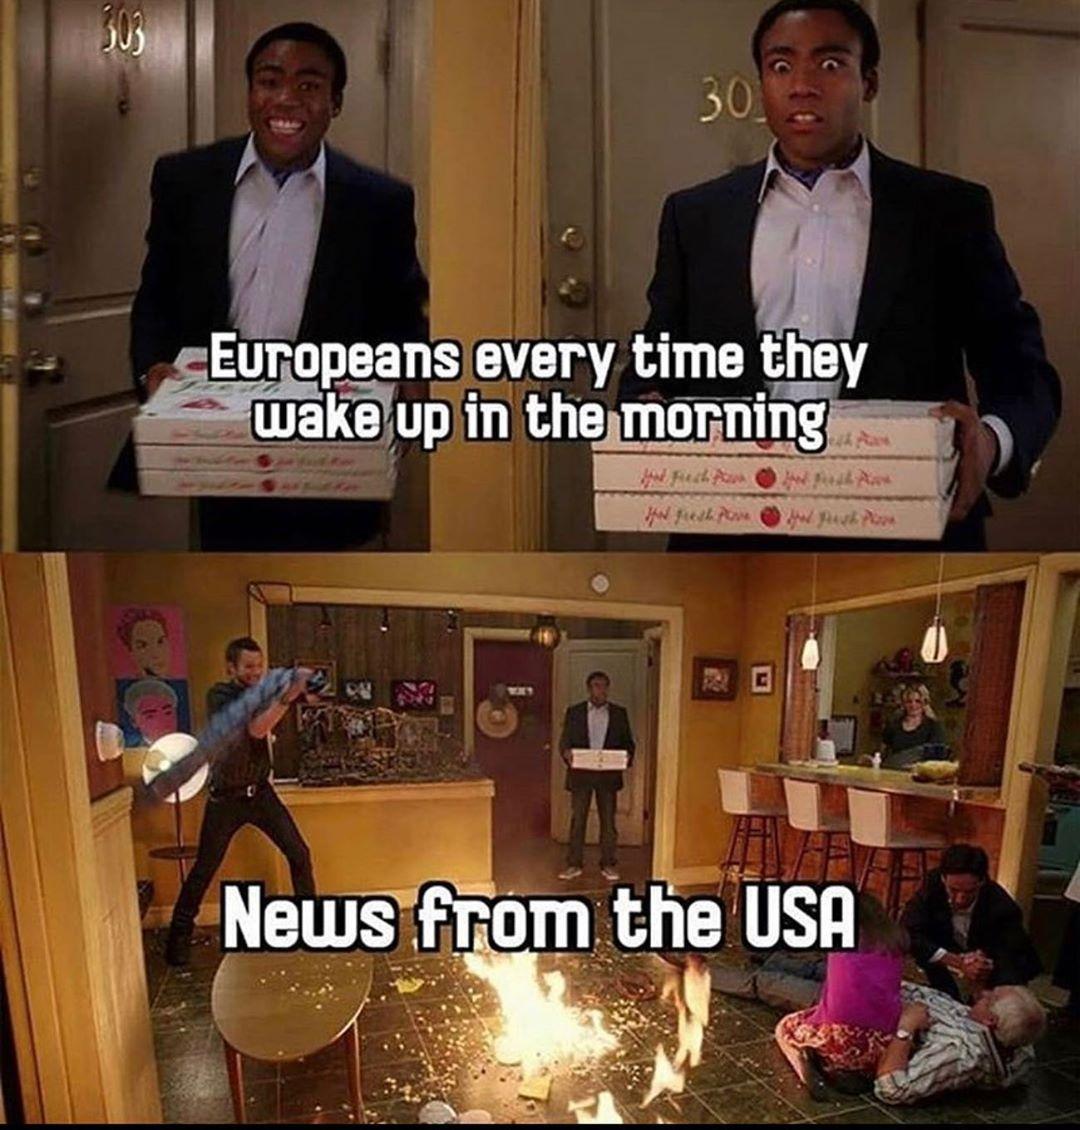 community pizza meme - 30 Europeans every time they wake up in the morning Rech wah News from the Usa